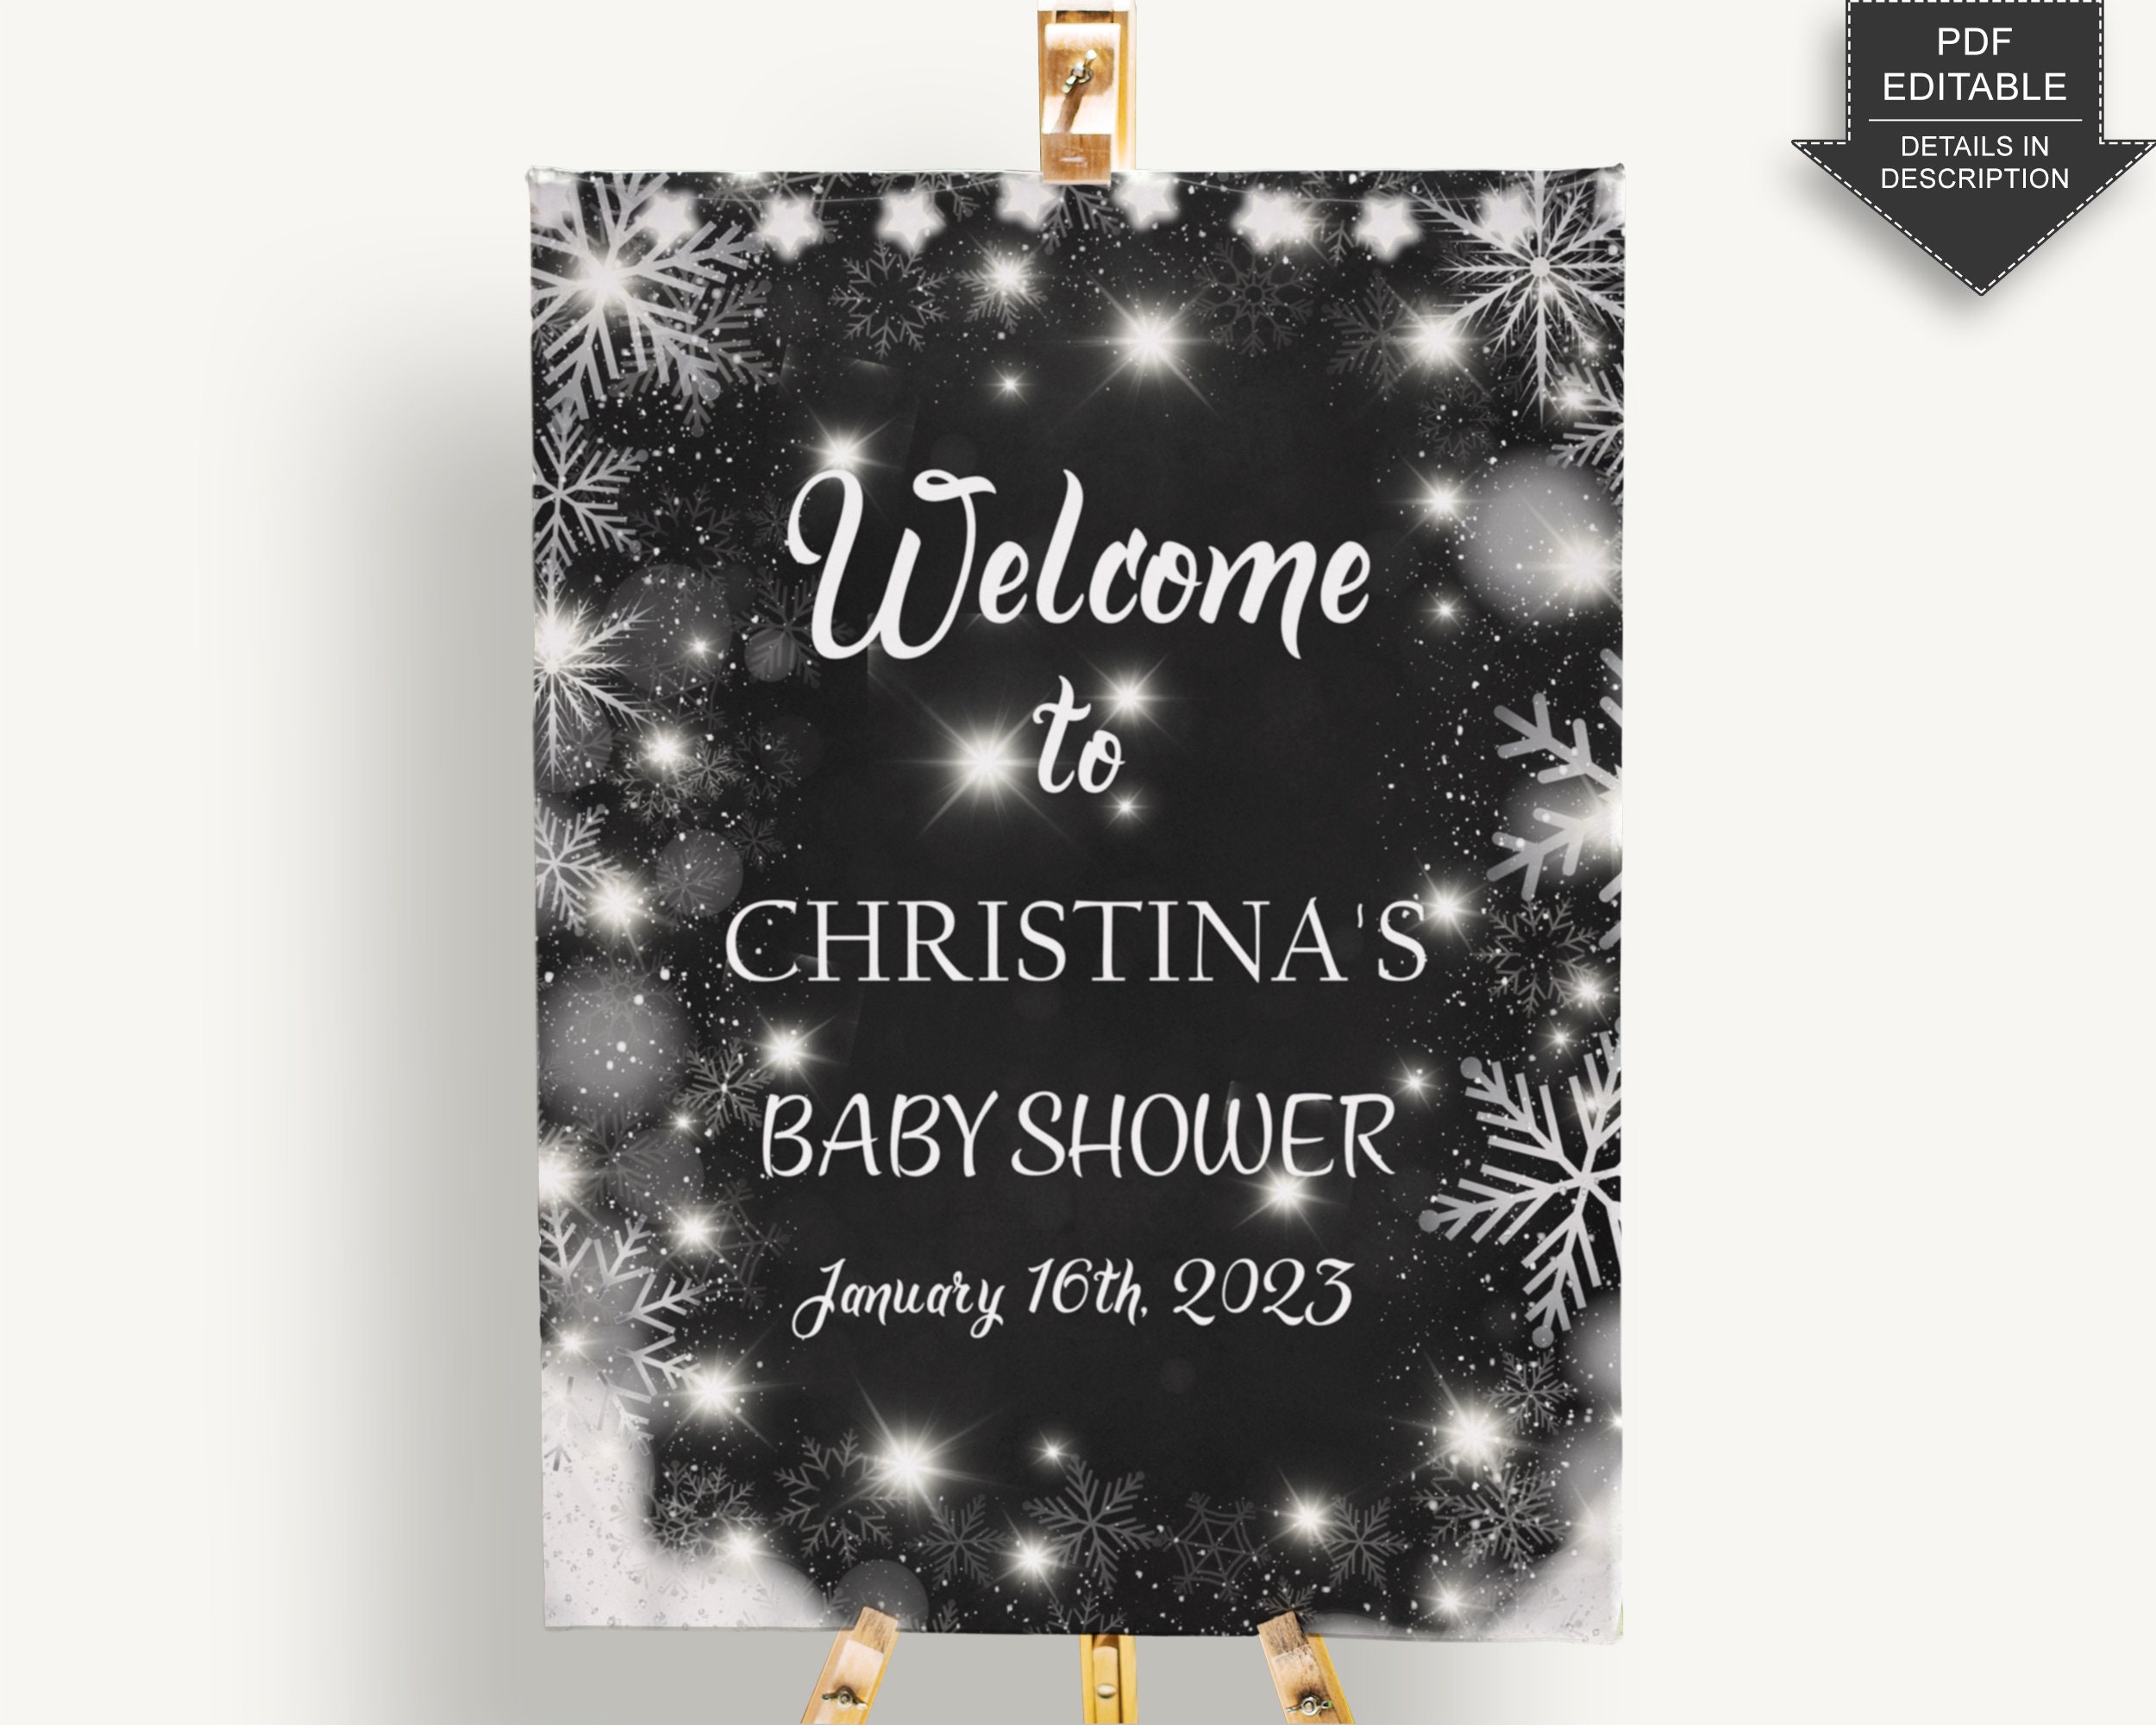 Baby Shower Welcome Sign - White Chalkboard - Nifty Printables